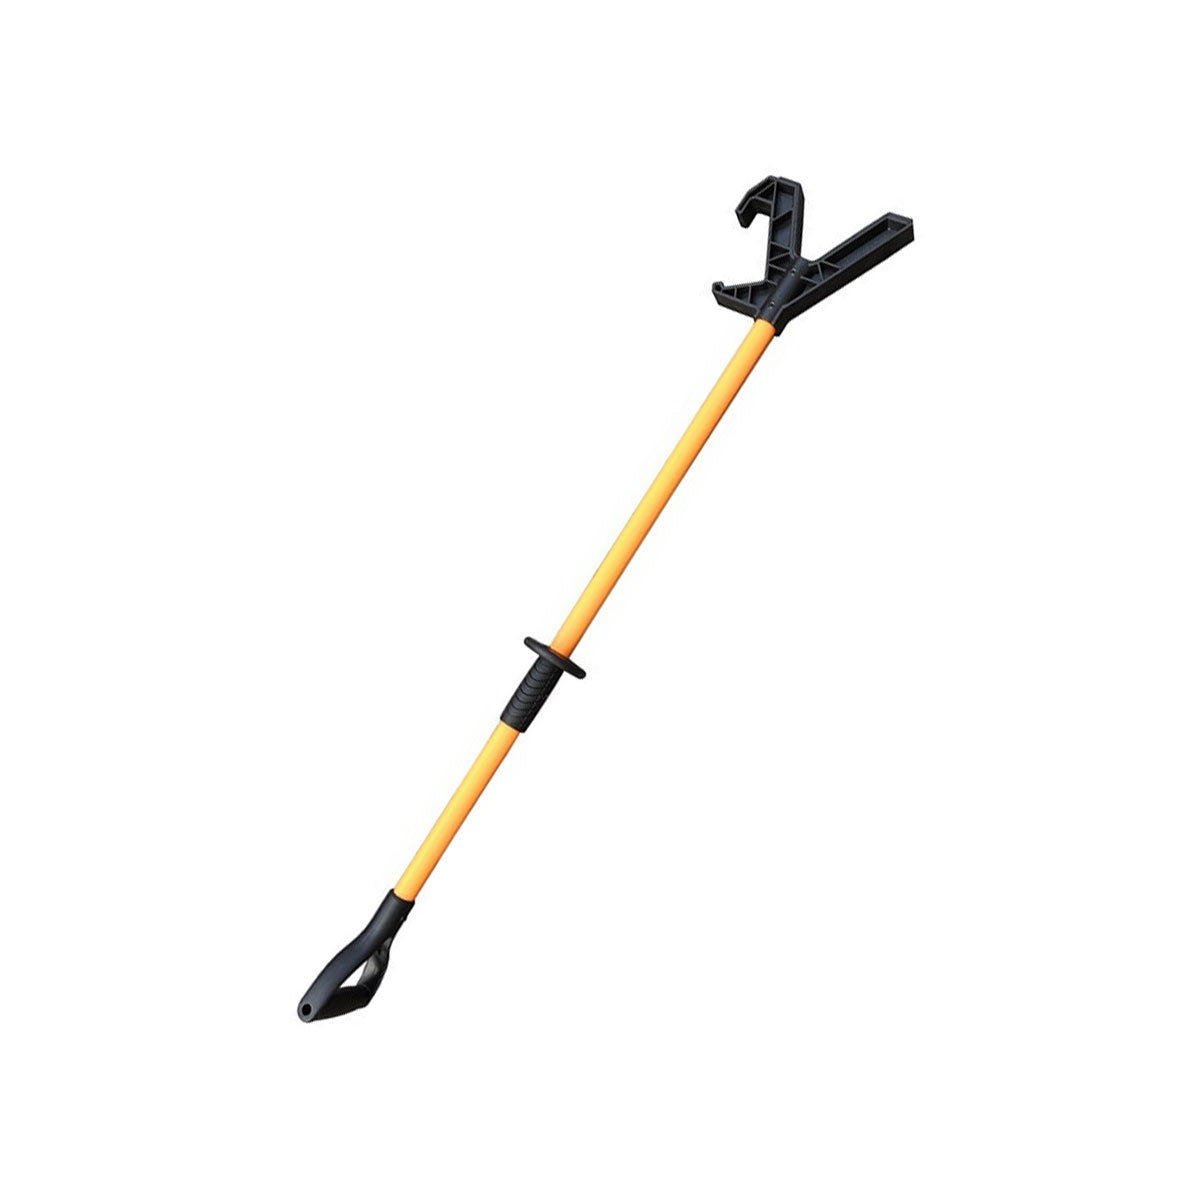 Stiffy Tool 50" with D Handle and Rubber Insert Non-Conductive